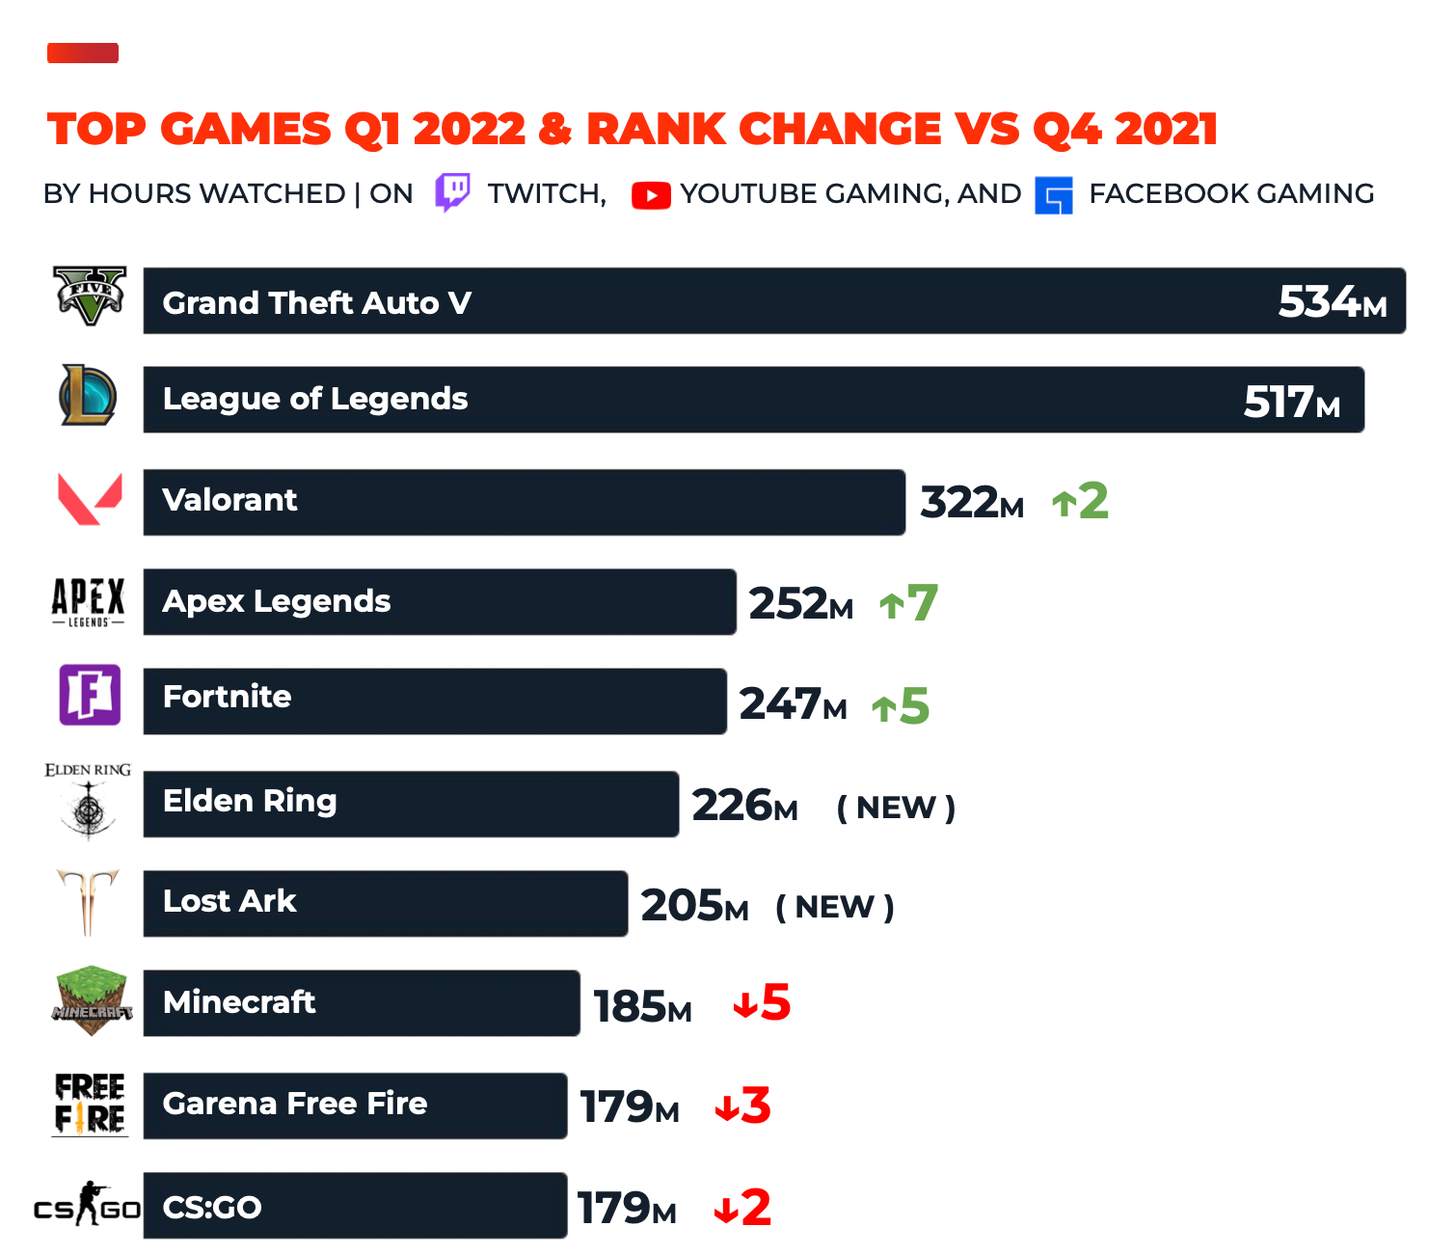 Subway Surfers and Garena Free Fire were the most downoladed mobile games  in Q4 2022. The top 5 list by downloads is primarily made up of older games  but some newer titles